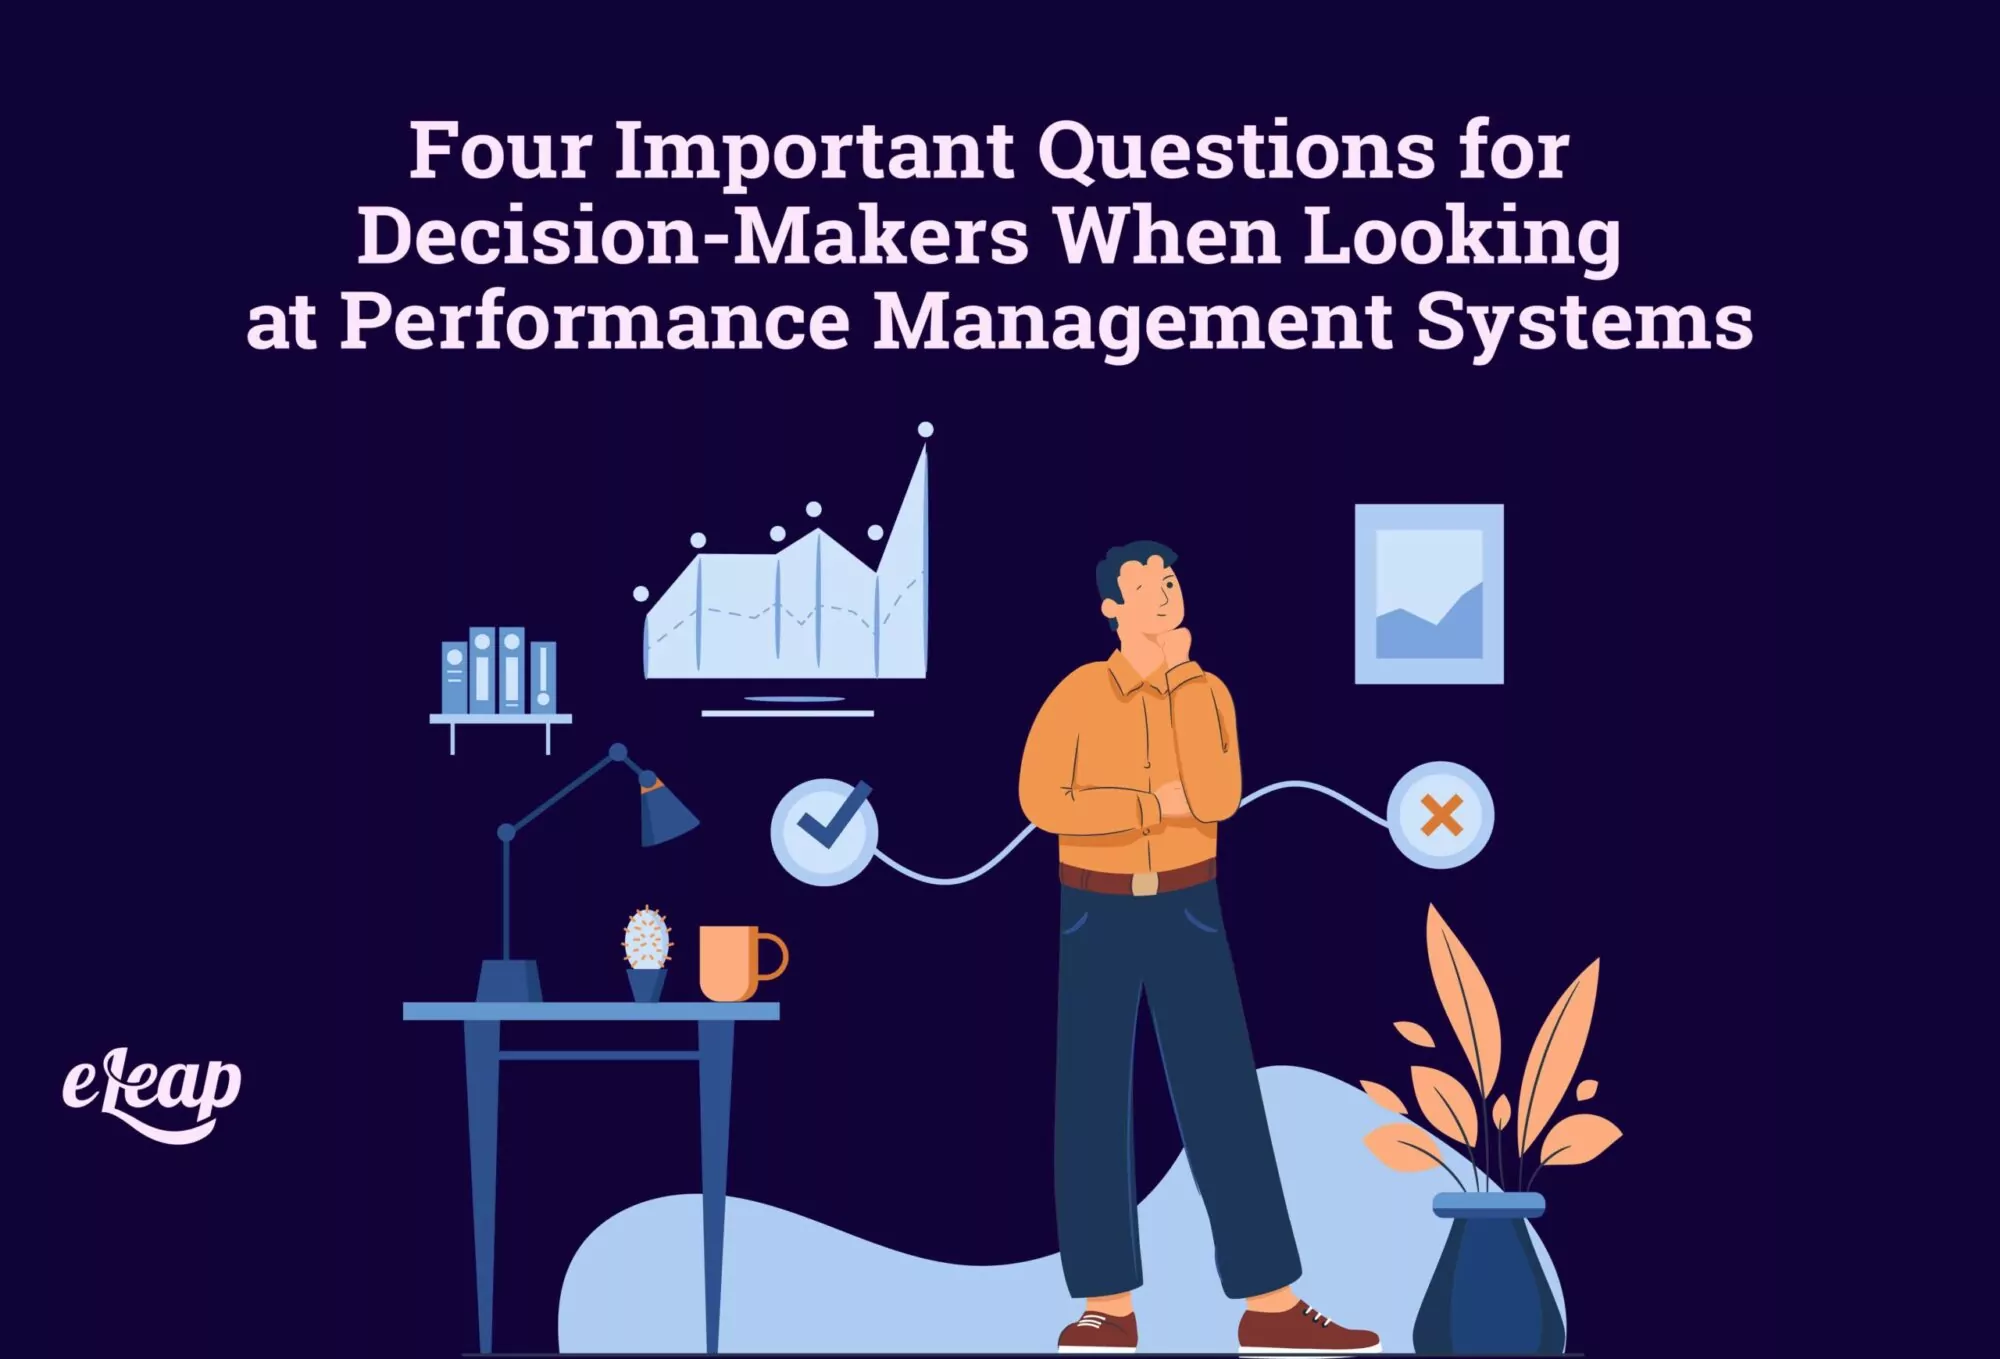 Four Important Questions for Decision-Makers When Looking at Performance Management Systems